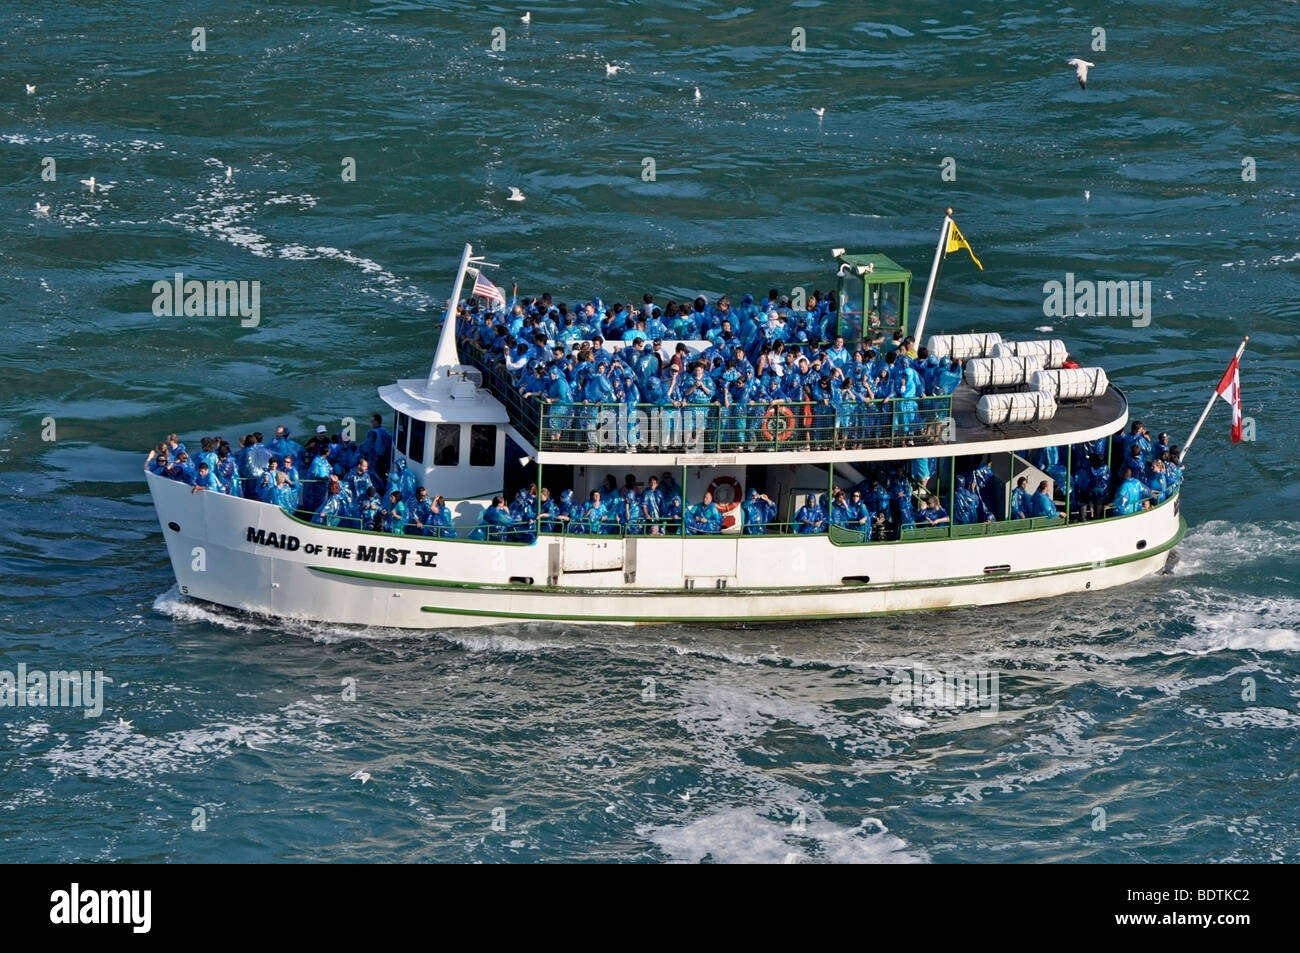 Maid of the Mist boat with tourists, Niagara Falls, Canada Stock Photo